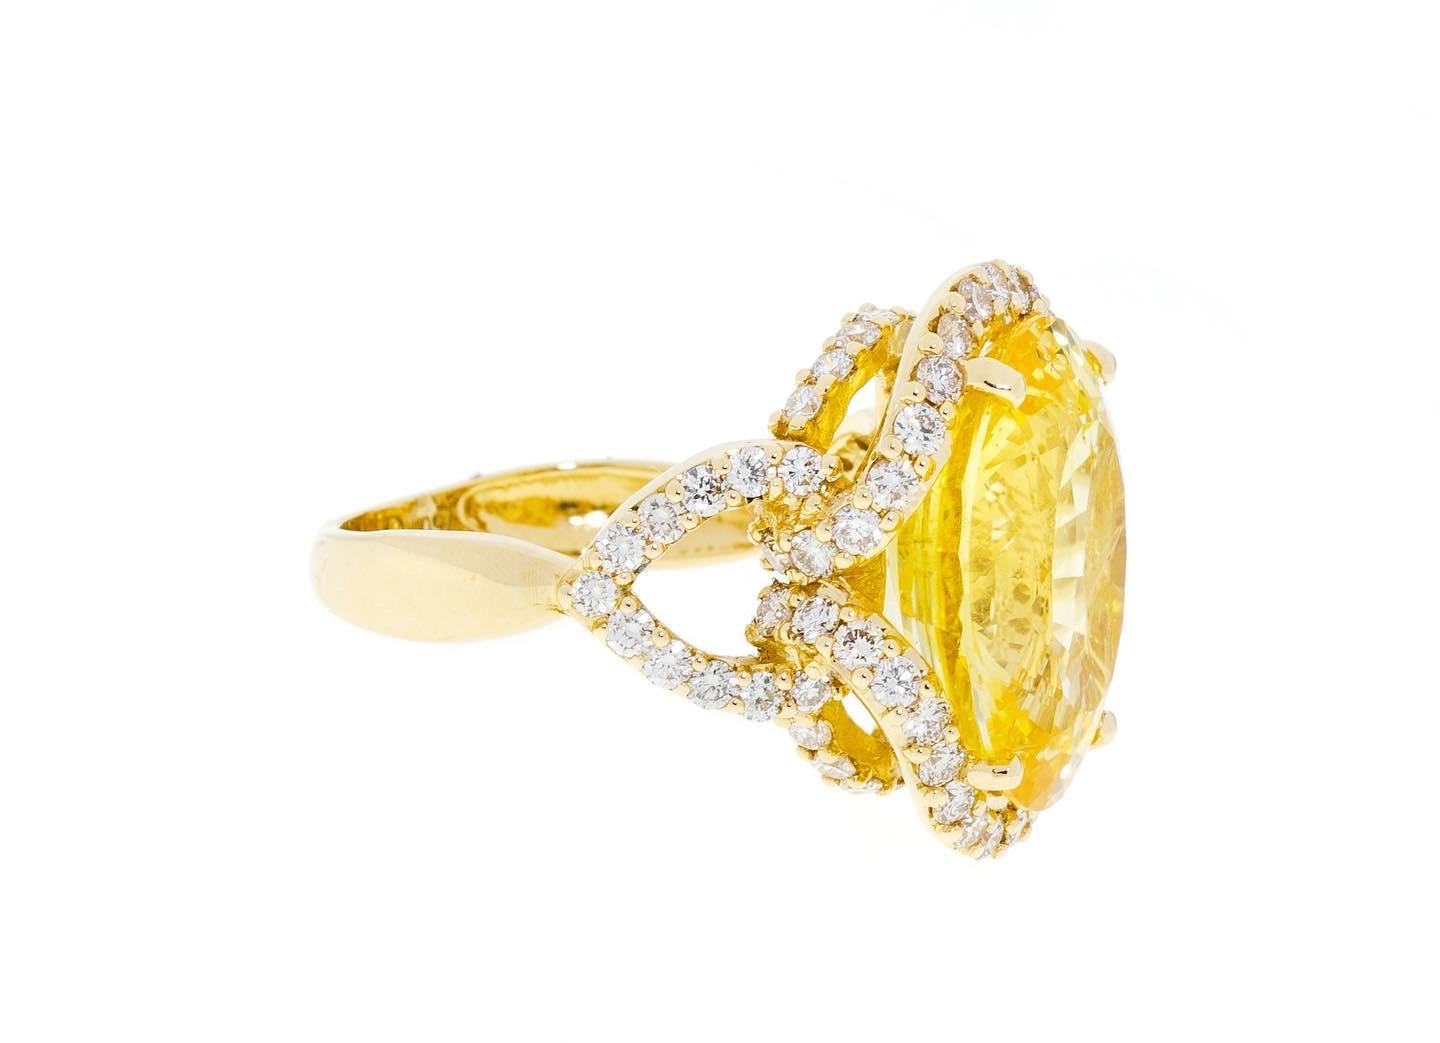 The gorgeous unheated oval-shaped sapphire looks astonishing on everybody as yellow is the color of joy and power. The elegant gem enhanced with brilliant cut diamonds is a great statement jewelry piece for elegant ladies.